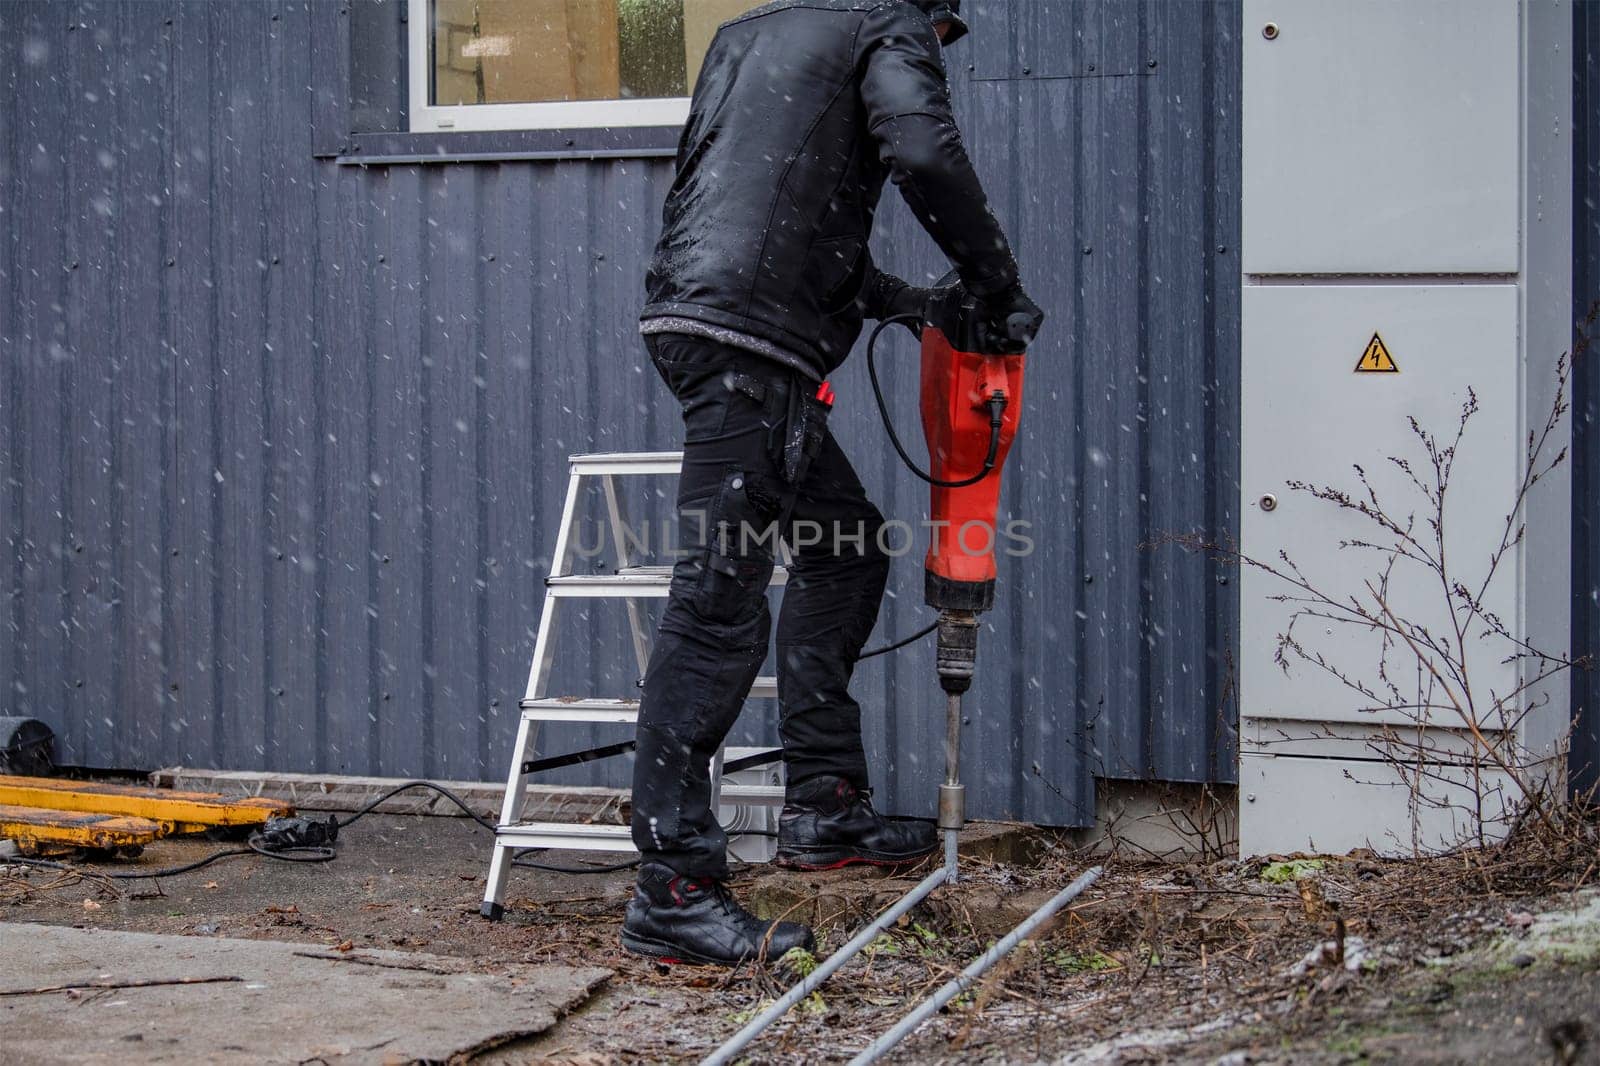 A worker installs a ground rod to ground a building. A worker in work clothes drives earth rods into the ground with a jackhammer to prevent short circuits